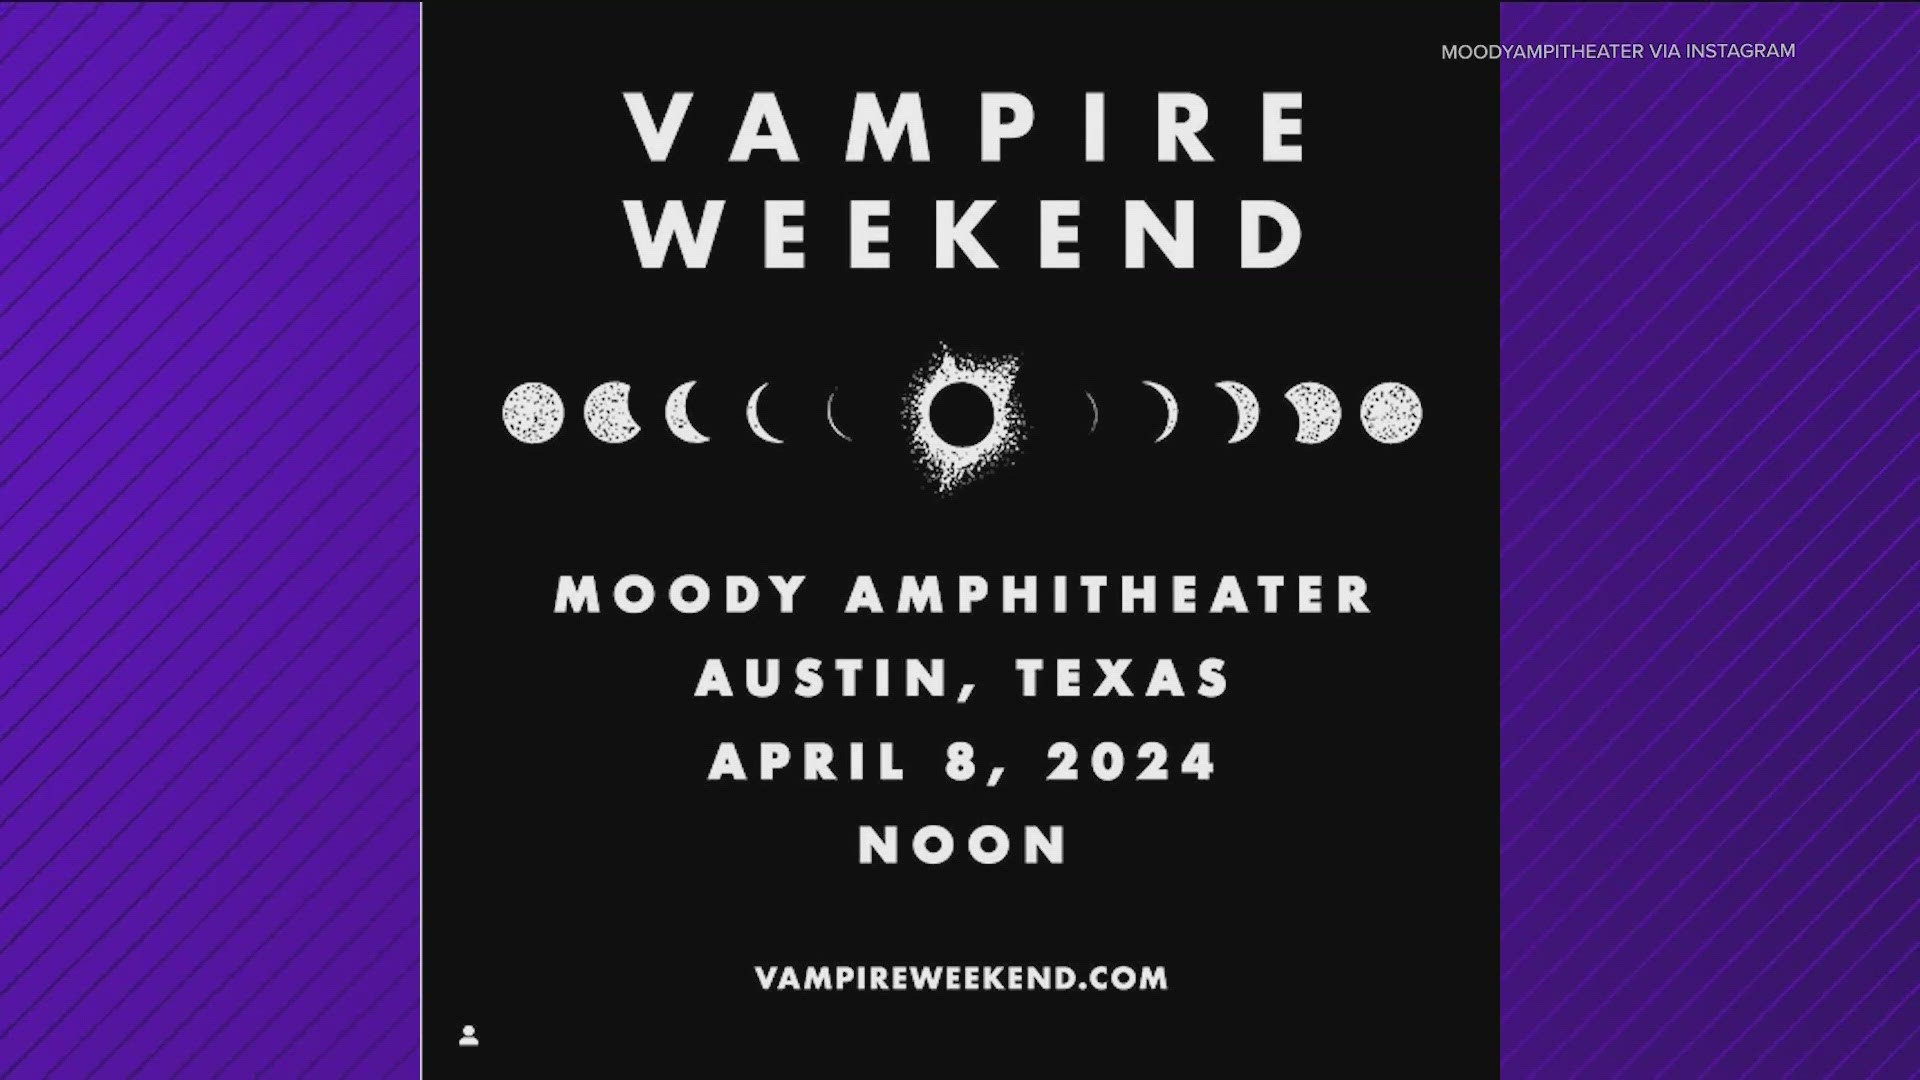 Eclipse glasses will be provided at the show at the Moody Amphitheater at Waterloo Park.